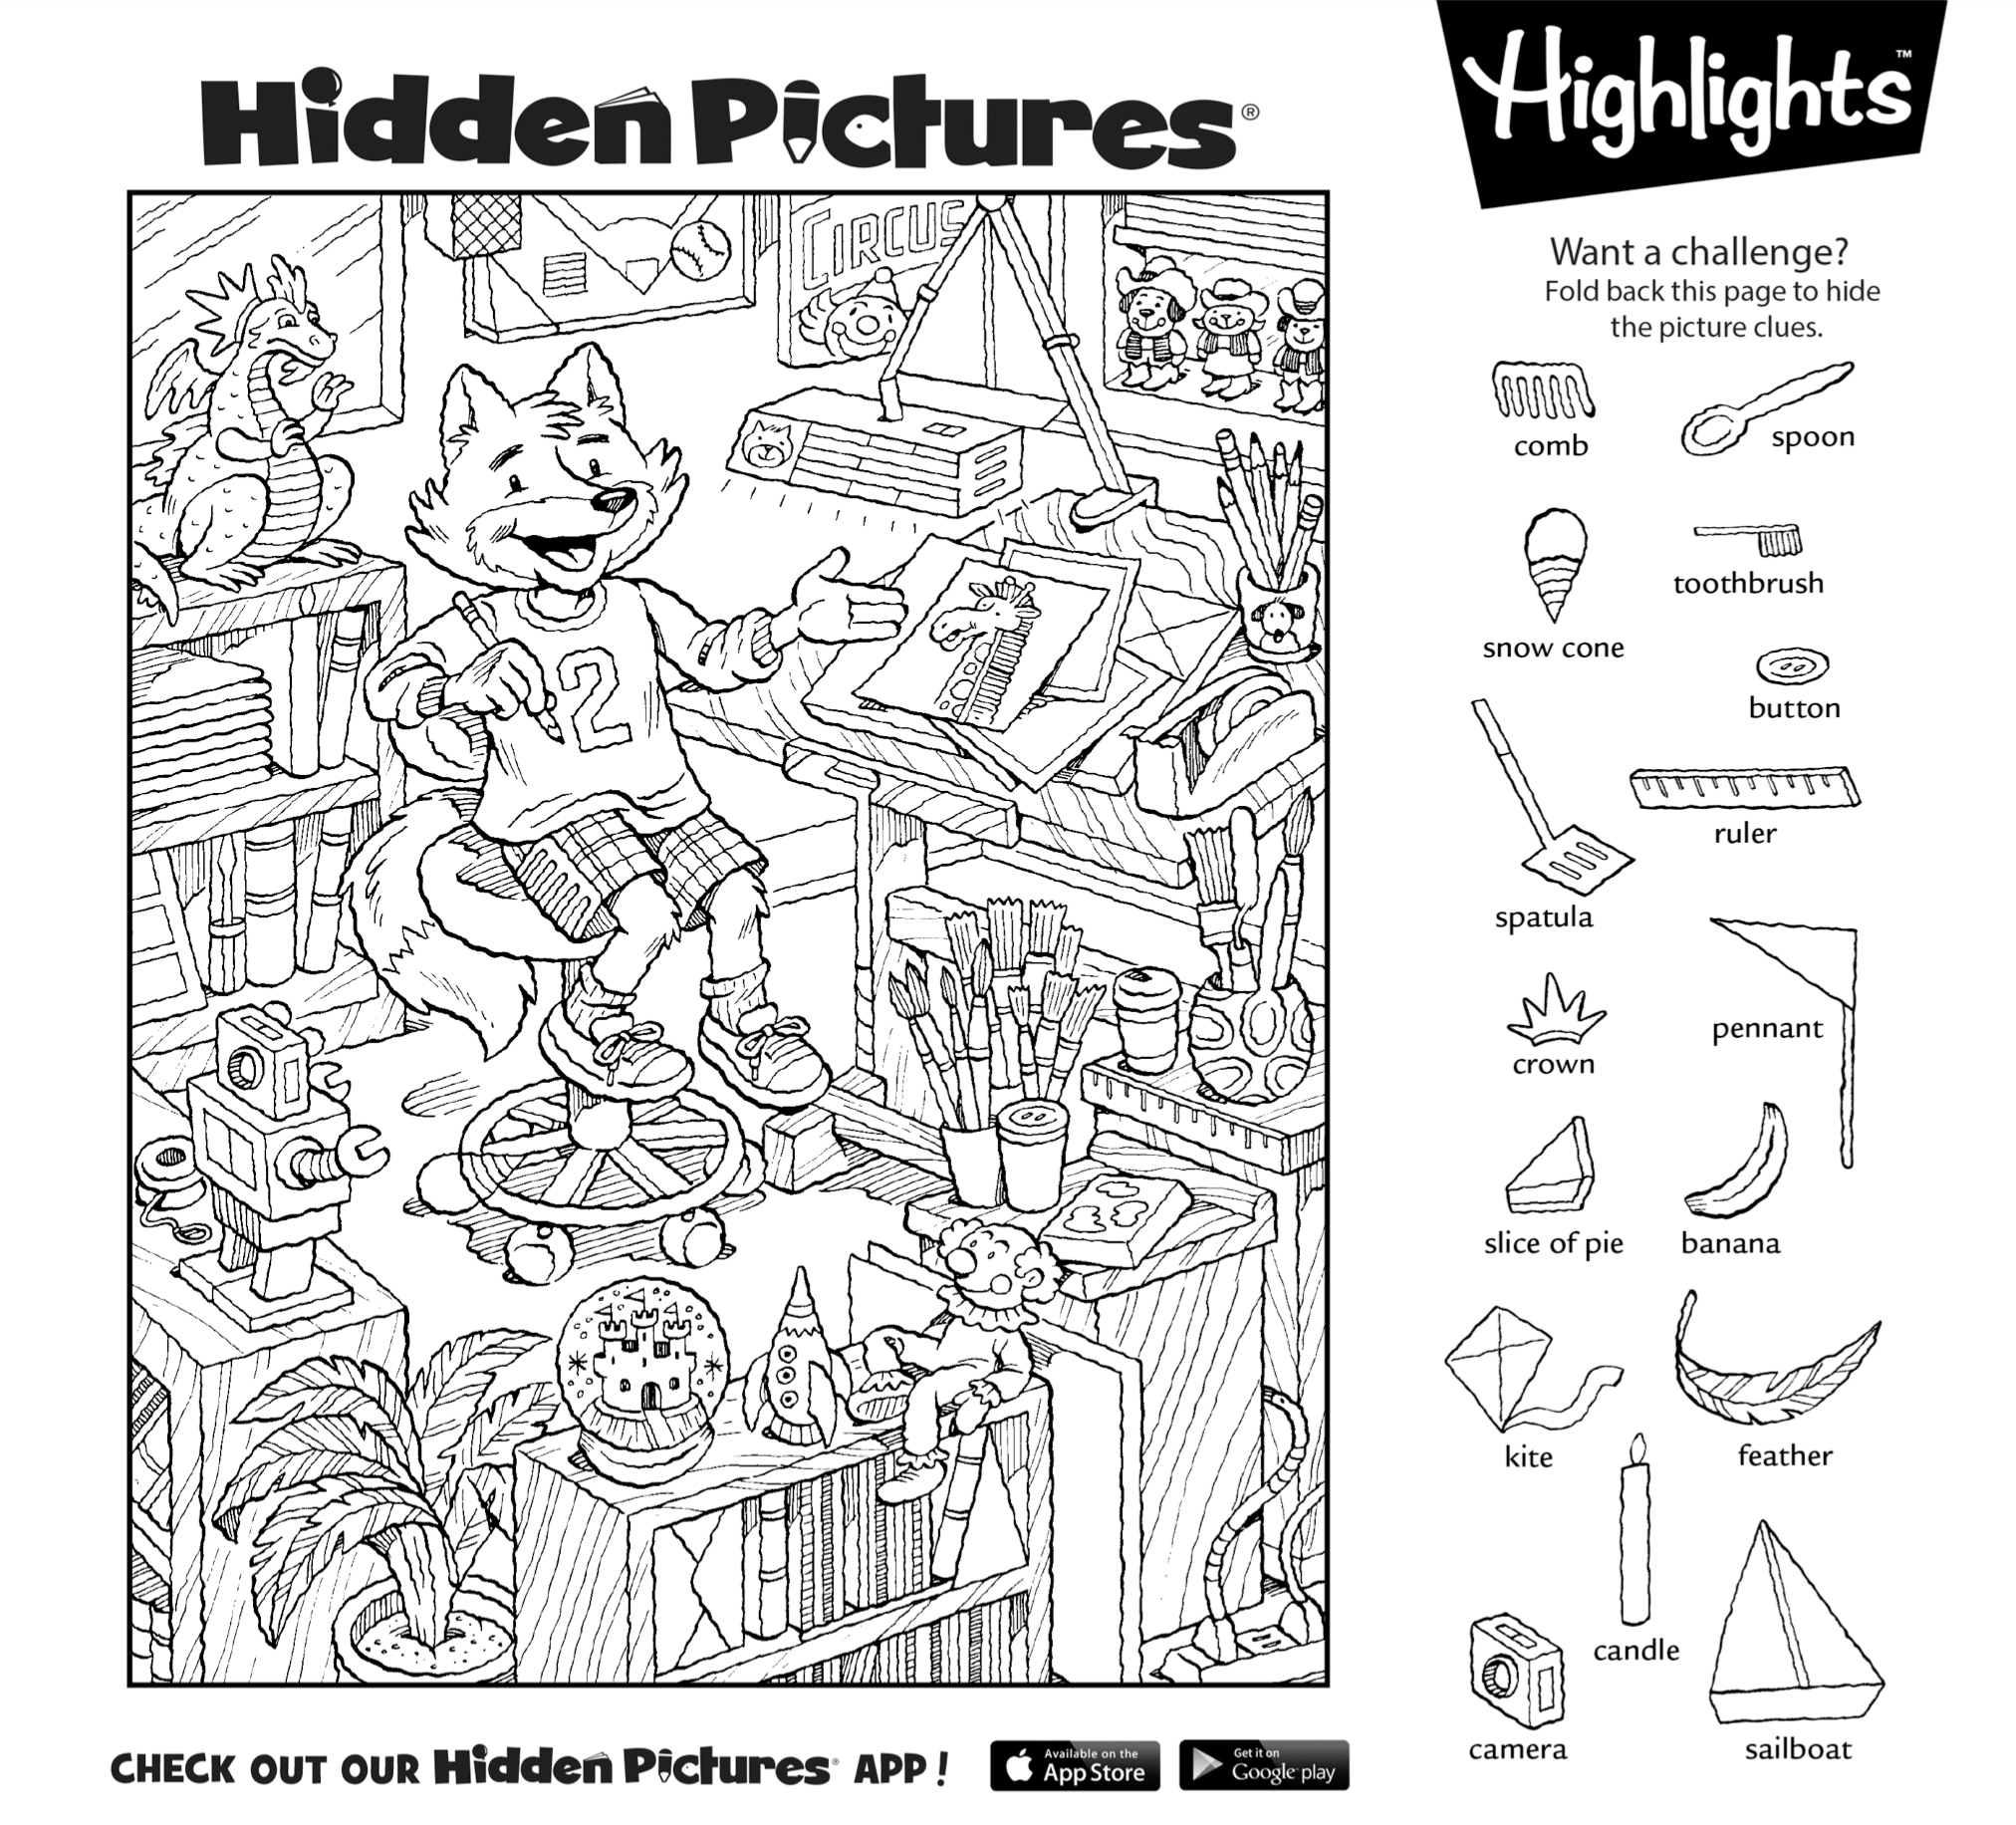 Download This Free Printable Hidden Pictures Puzzle To Share With - Free Printable Hidden Pictures For Adults